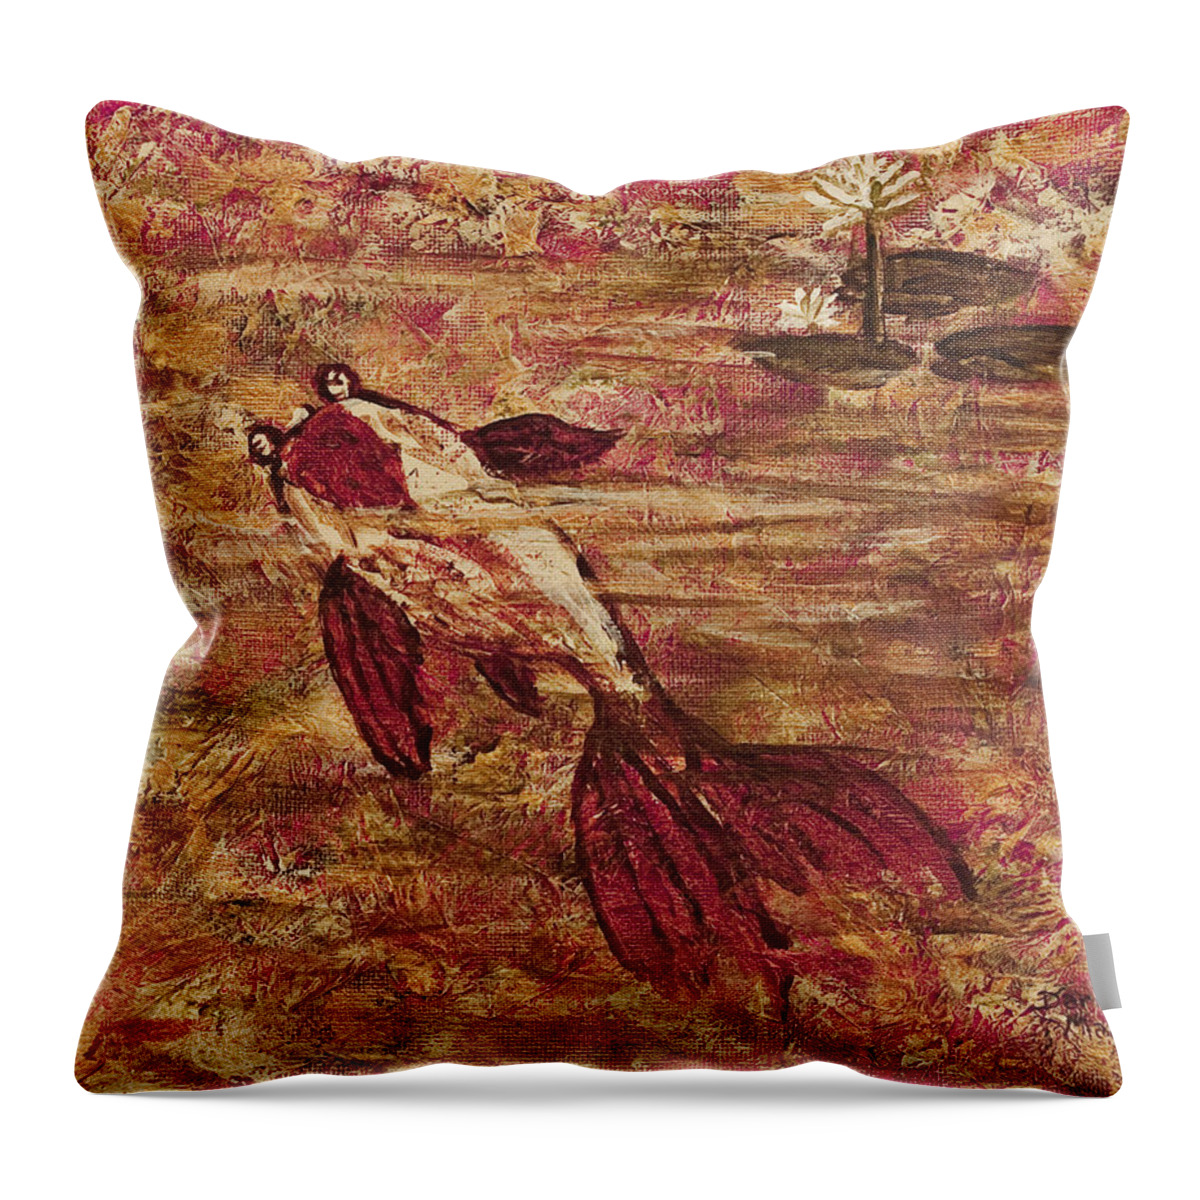 Koi Pond Throw Pillow featuring the painting Koi Pond by Darice Machel McGuire